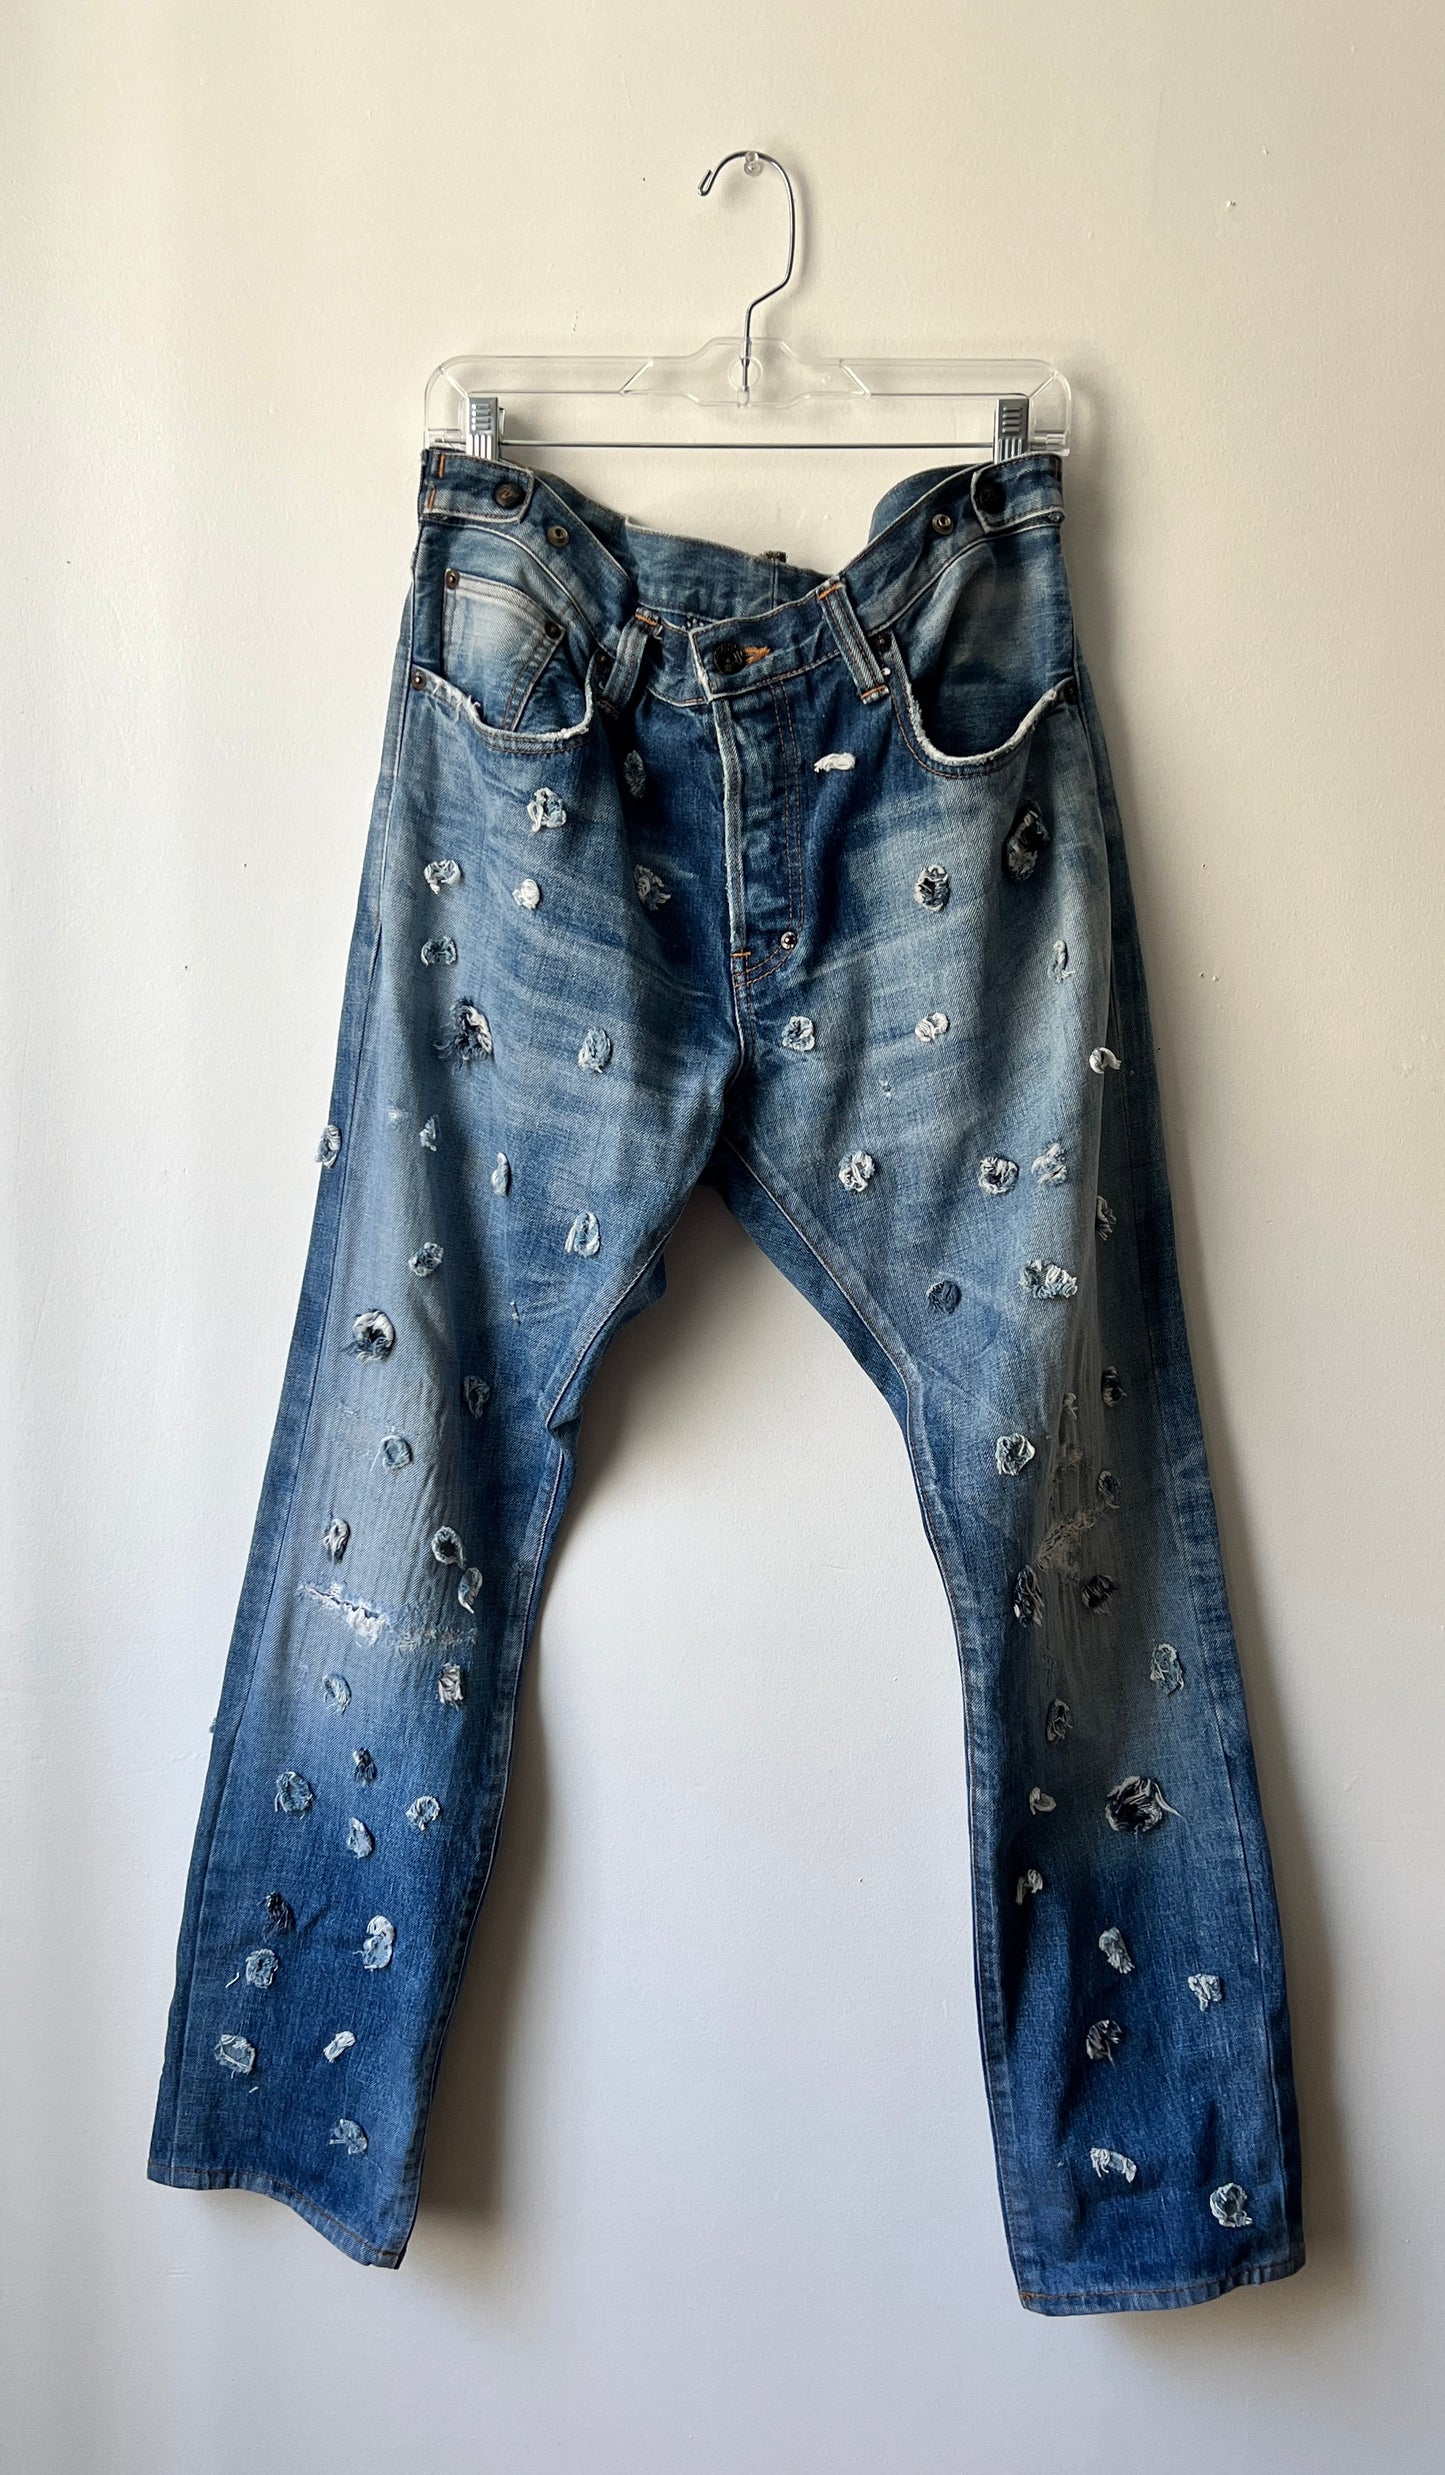 Square Patch Jeans